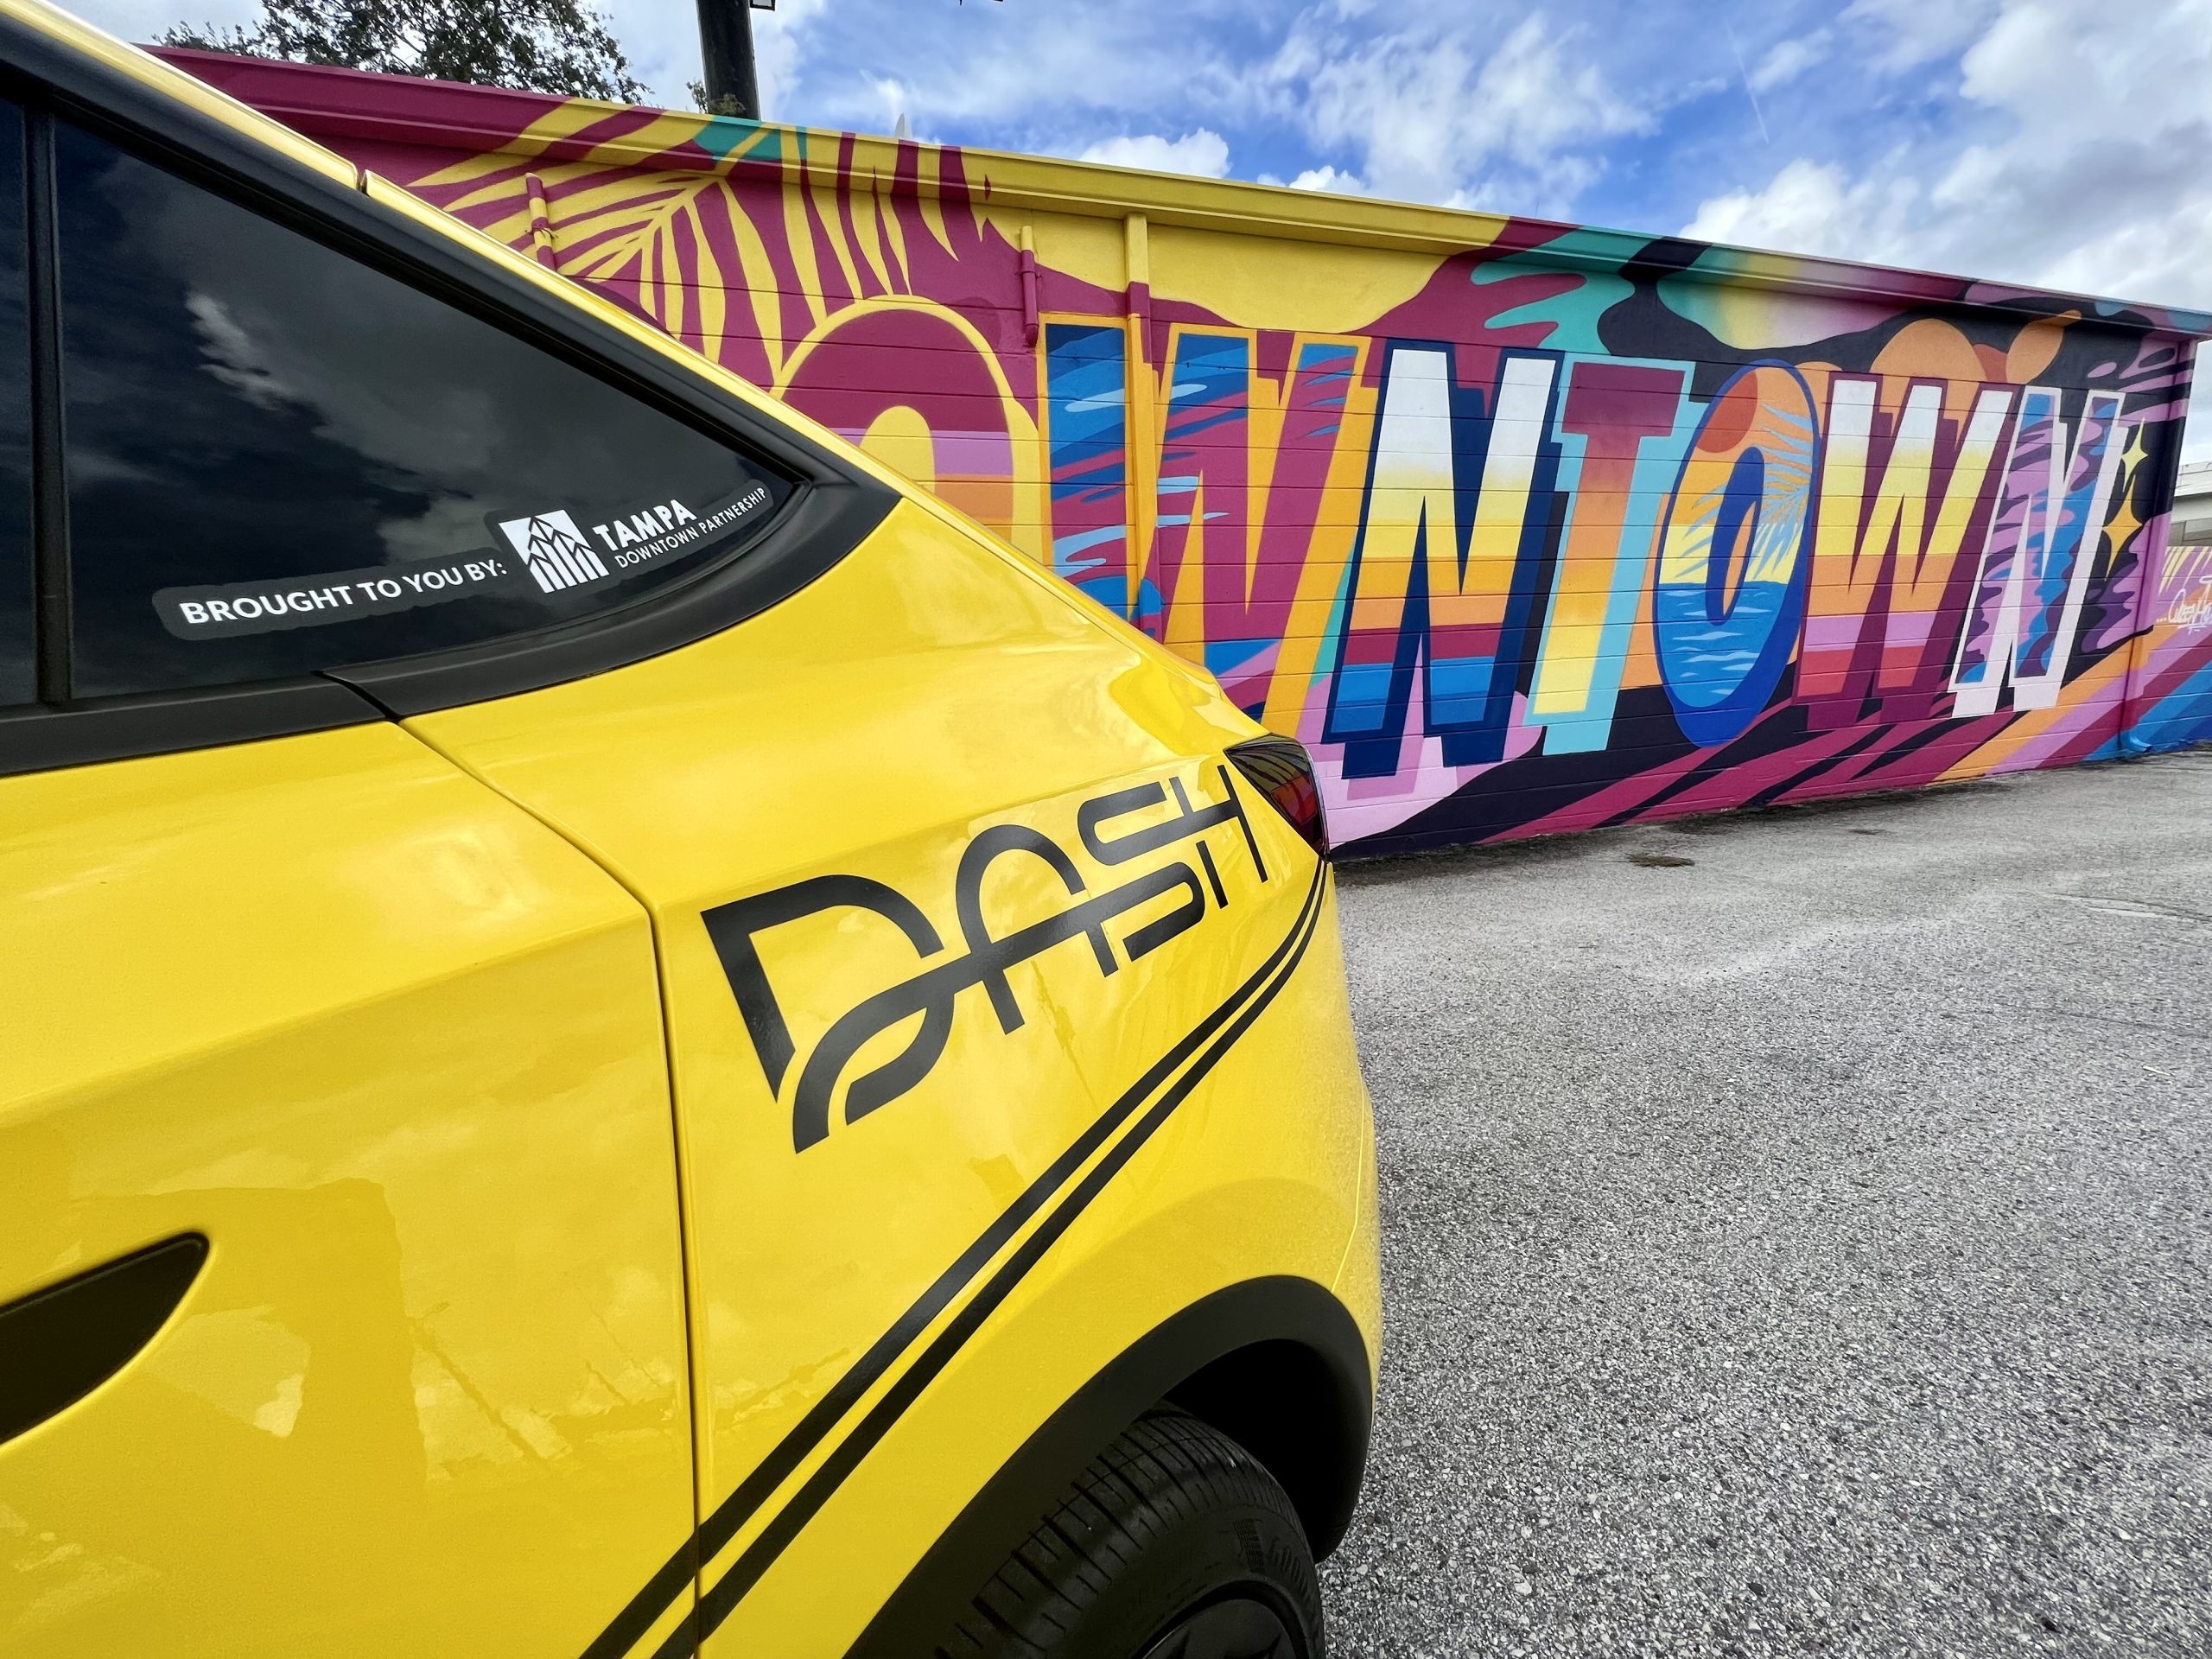 Photo-4-DASH-first-look-source-is-Tampa-Downtown-Partnership